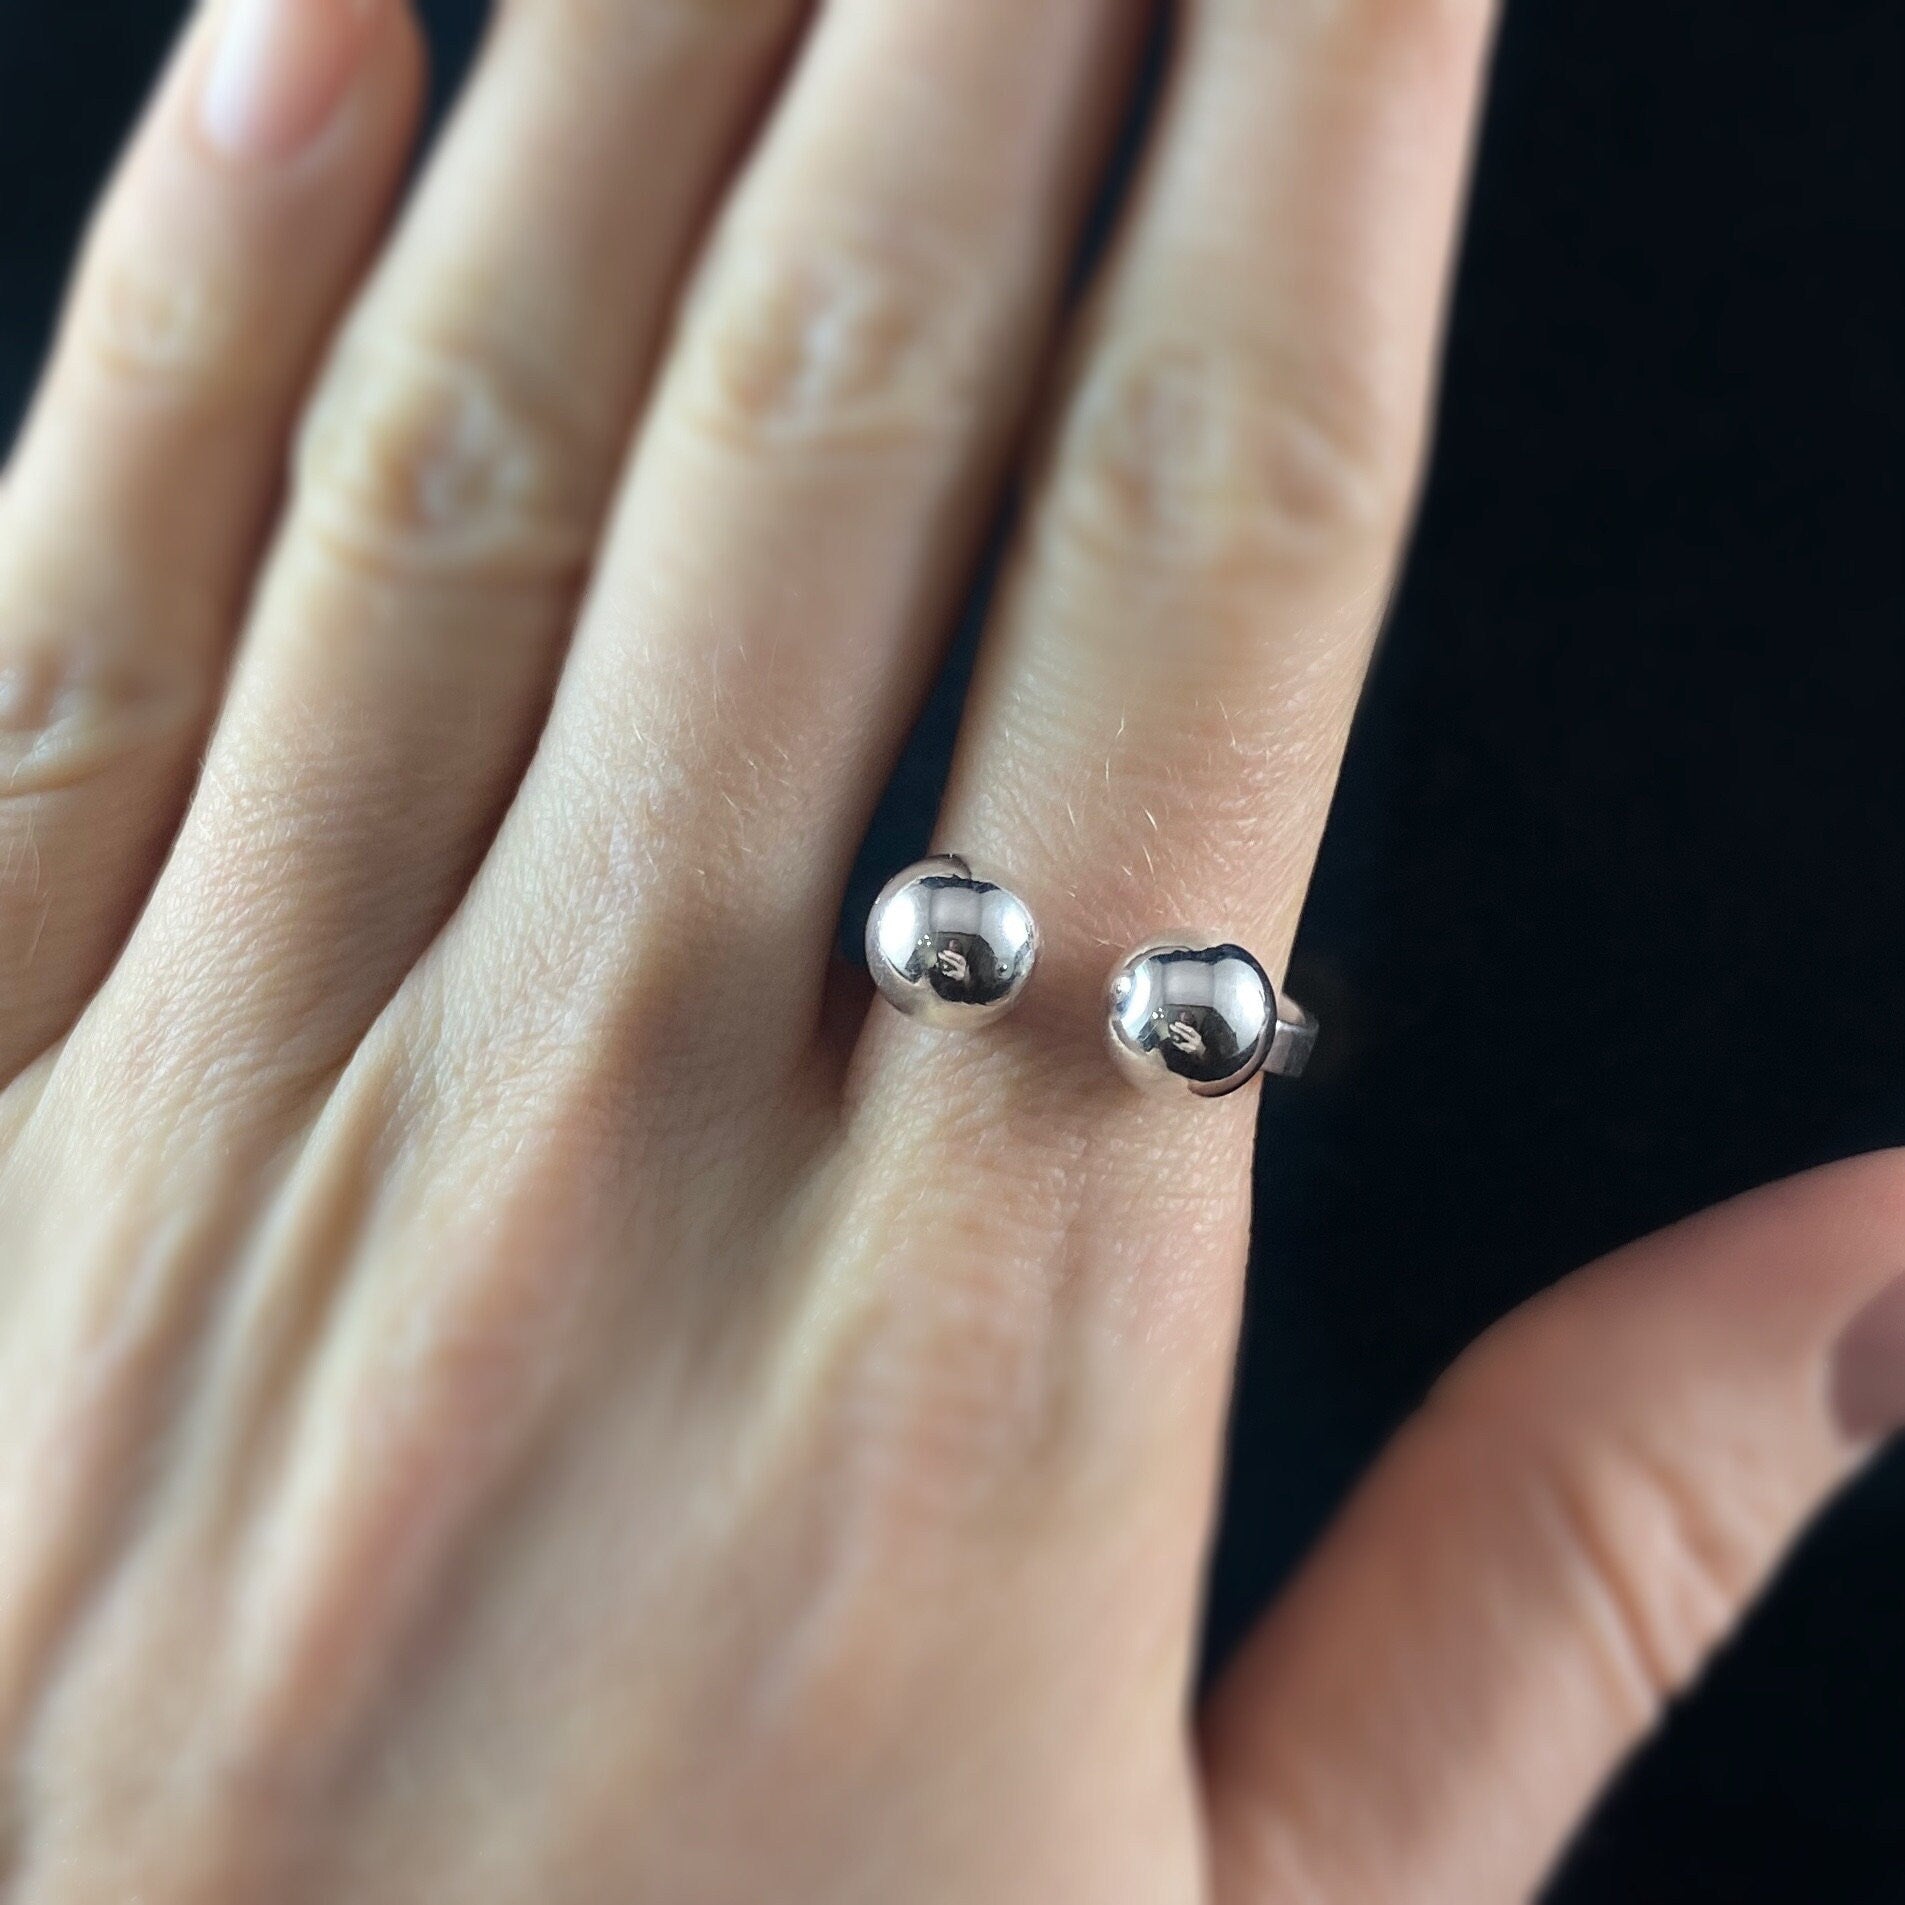 Silver Statement Ring with Two Spheres - Handmade Nickel Free Ulla Jewelry